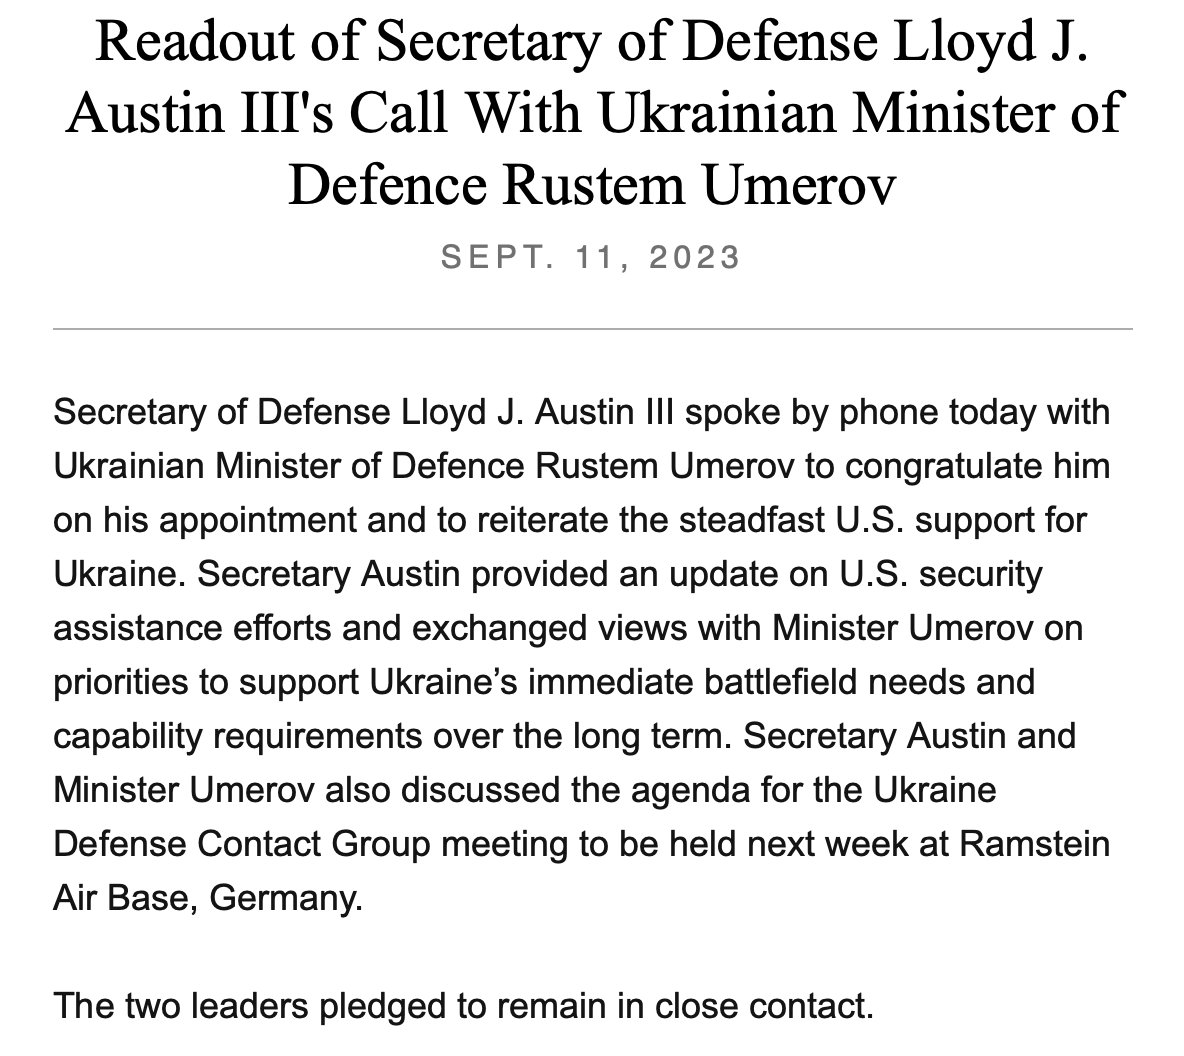 US @SecDef Lloyd Austin spoke Monday with new Ukraine Defense Minister Rustem Umerov, per @DeptofDefense. Call was to reiterate the steadfast U.S. support for Ukraine and also give Umerov an update of US assistance